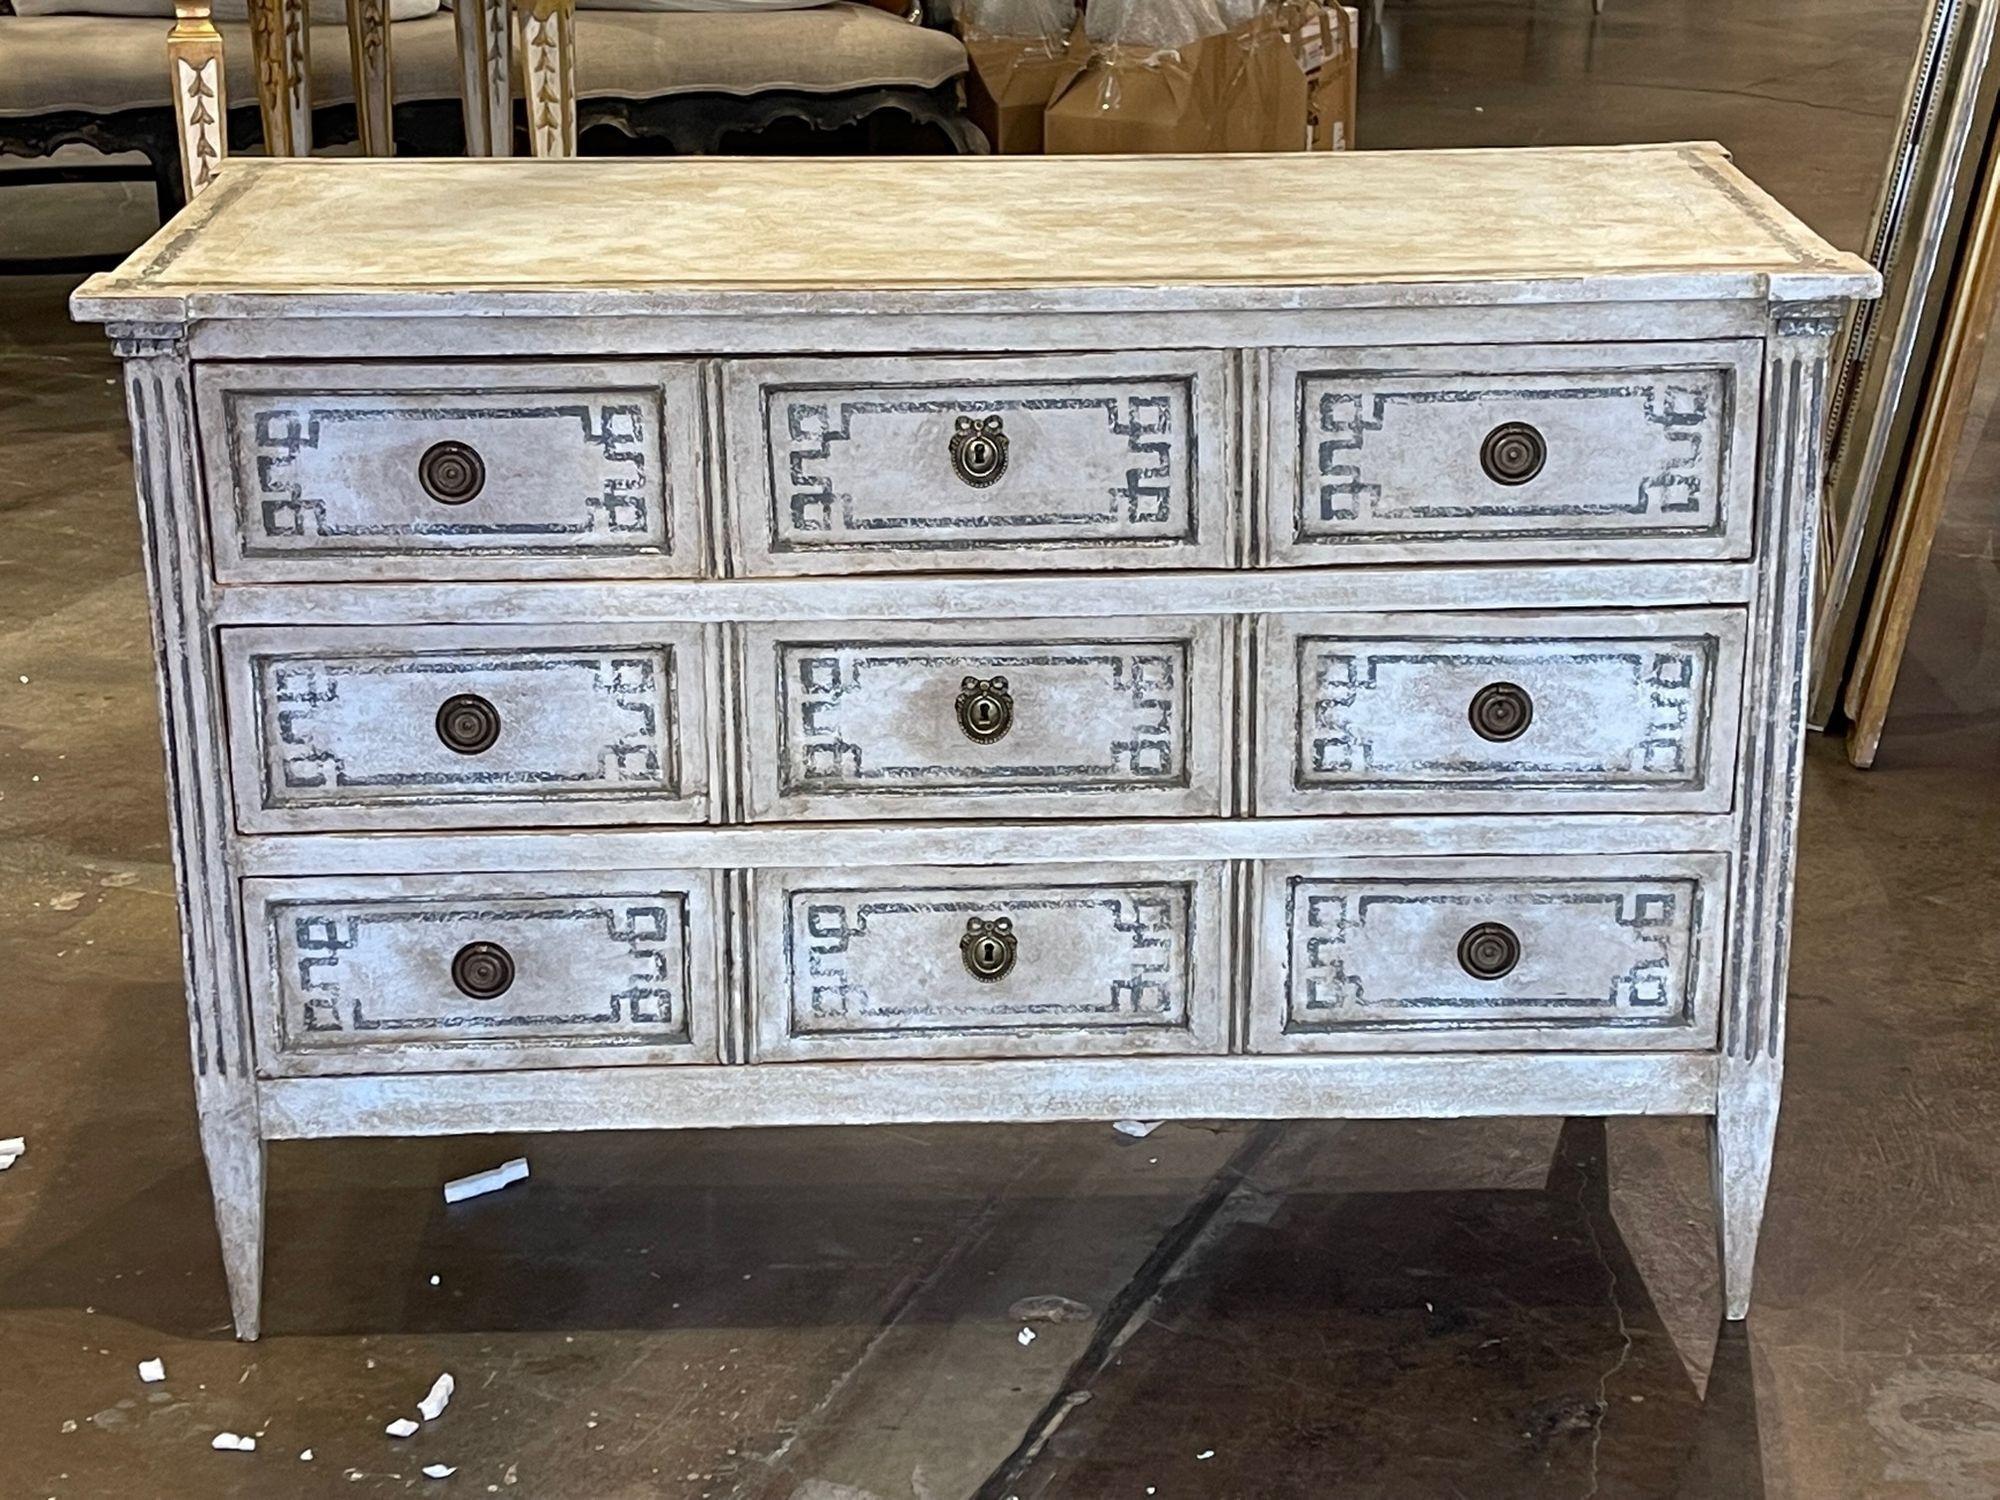 Lovely 19th century Italian Neo-Classical painted 3 drawer commode. This chest has 3 drawers for storage and simple clean lines. Very fine patina as well. So pretty!